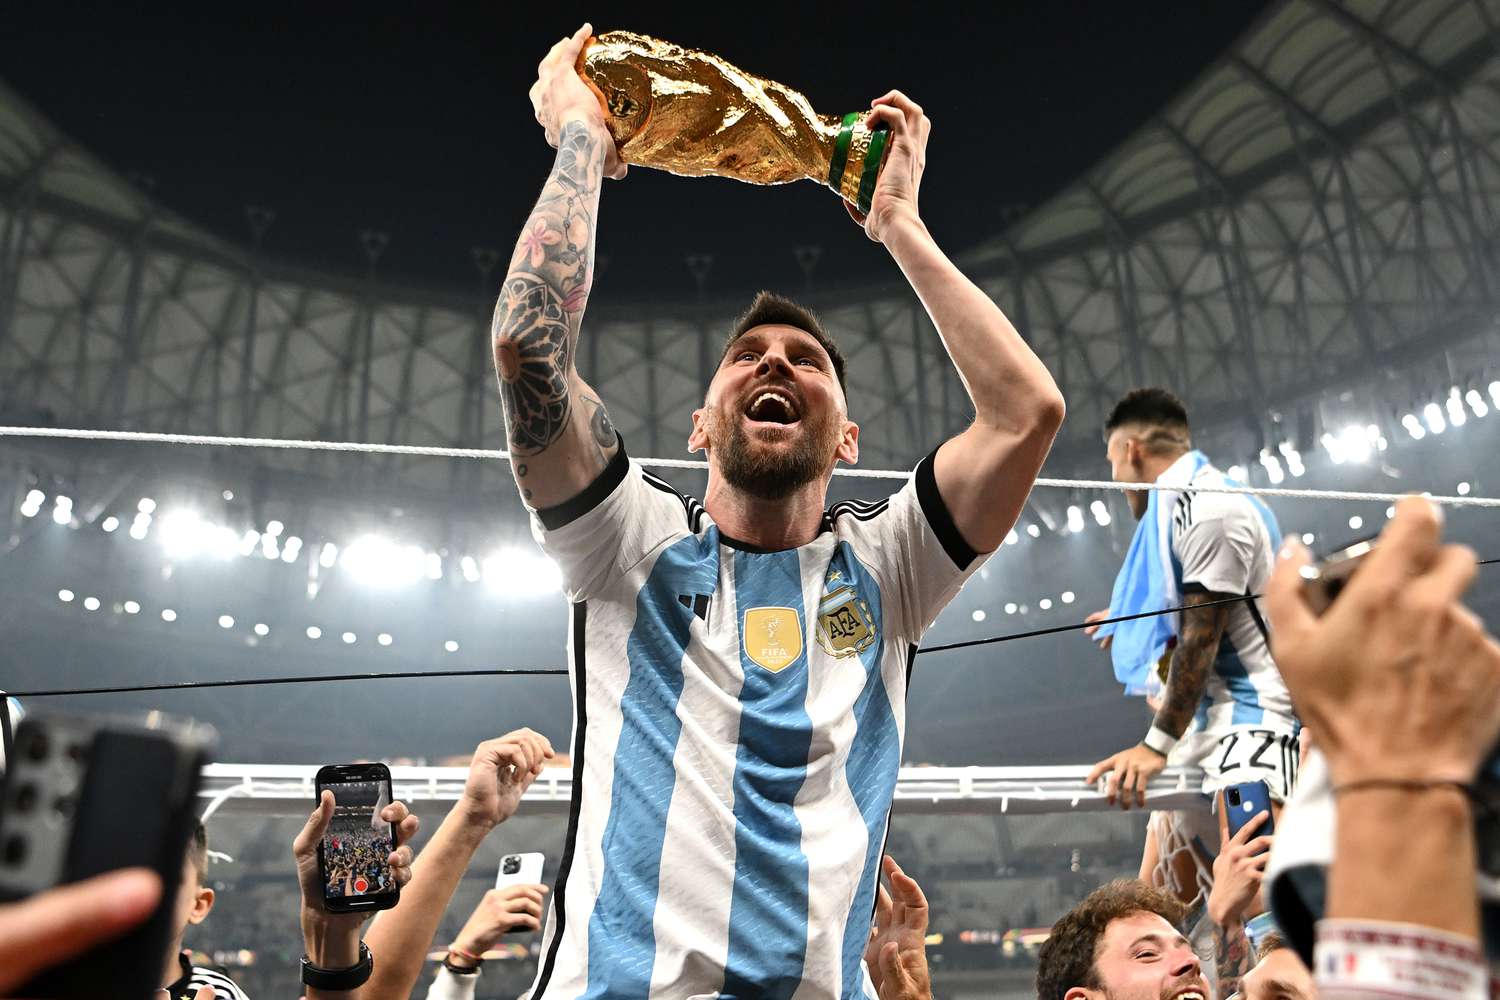 Lionel Messi's World Cup Trophy Photo Is Most Liked Post On Instagram